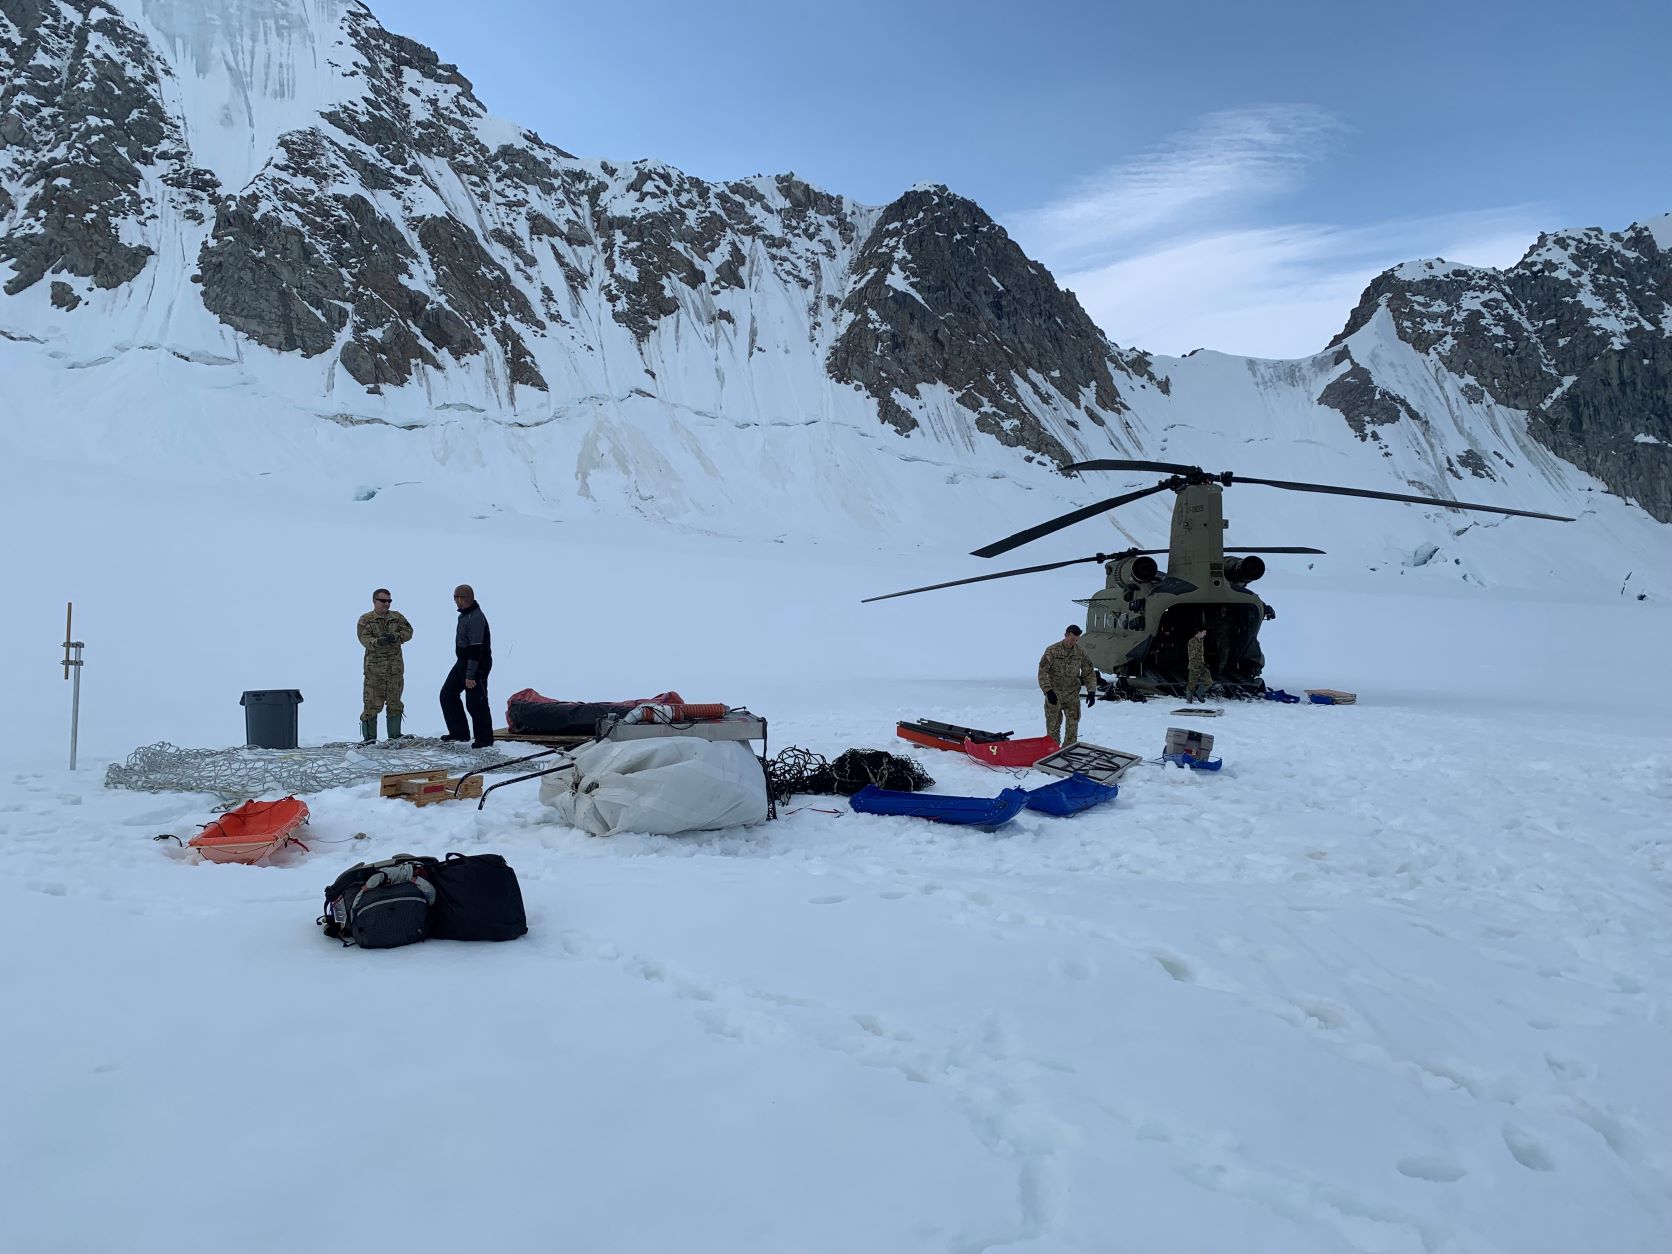 A Chinook heliicopter and members of its crew help load camp gear